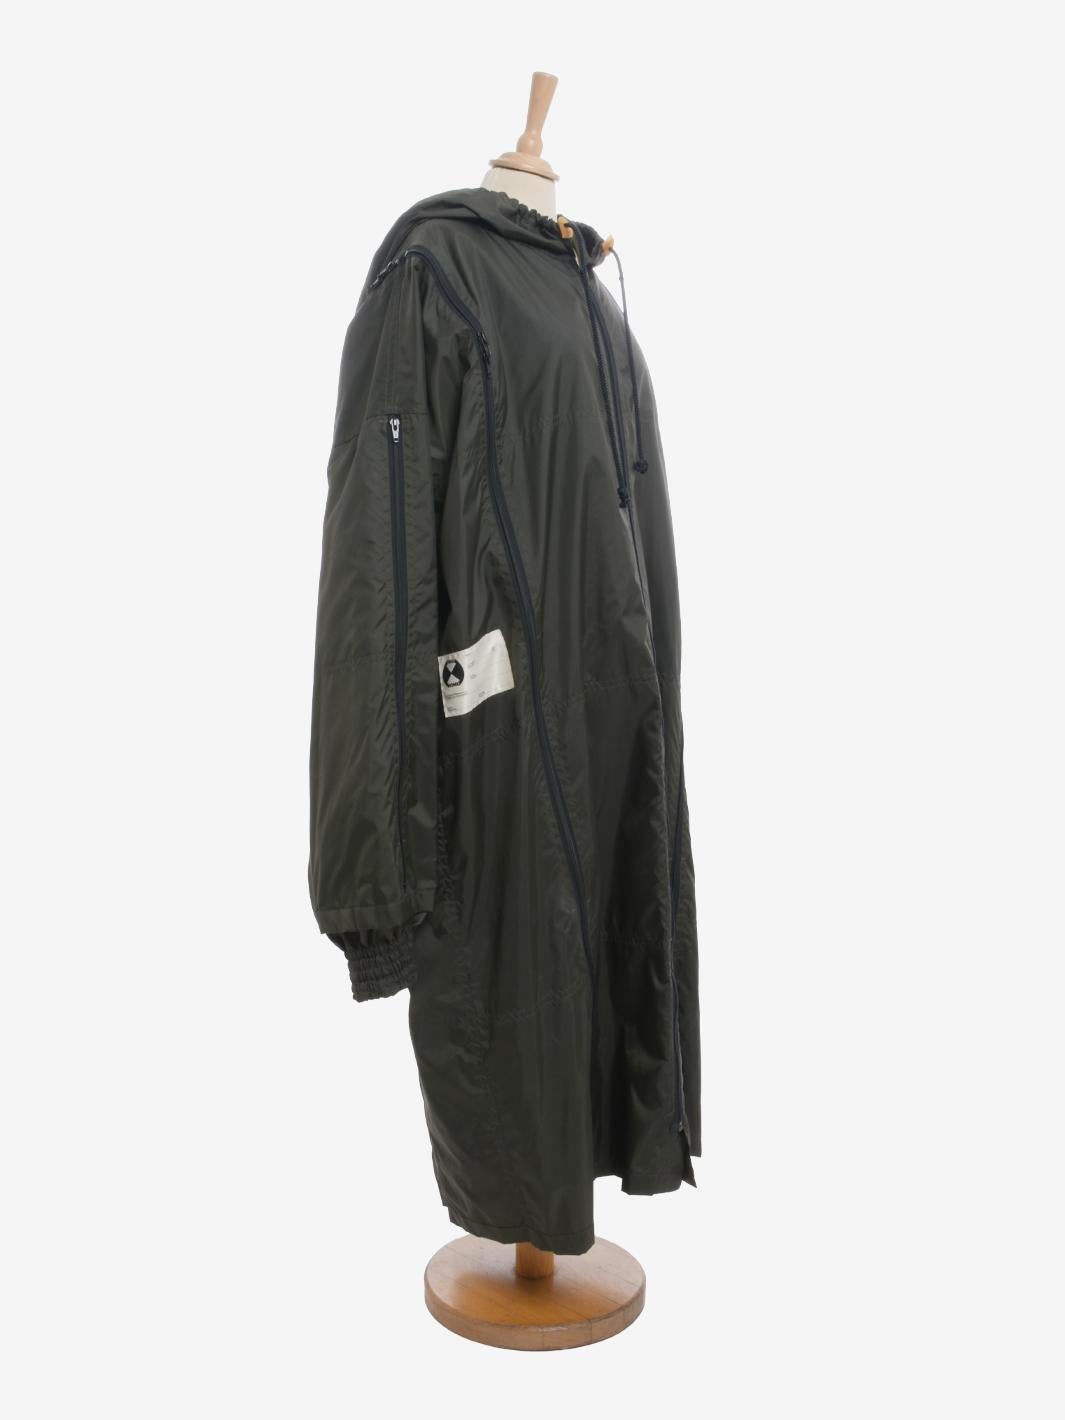 Final Home Trenchcoat - 90s In Excellent Condition For Sale In Milano, IT